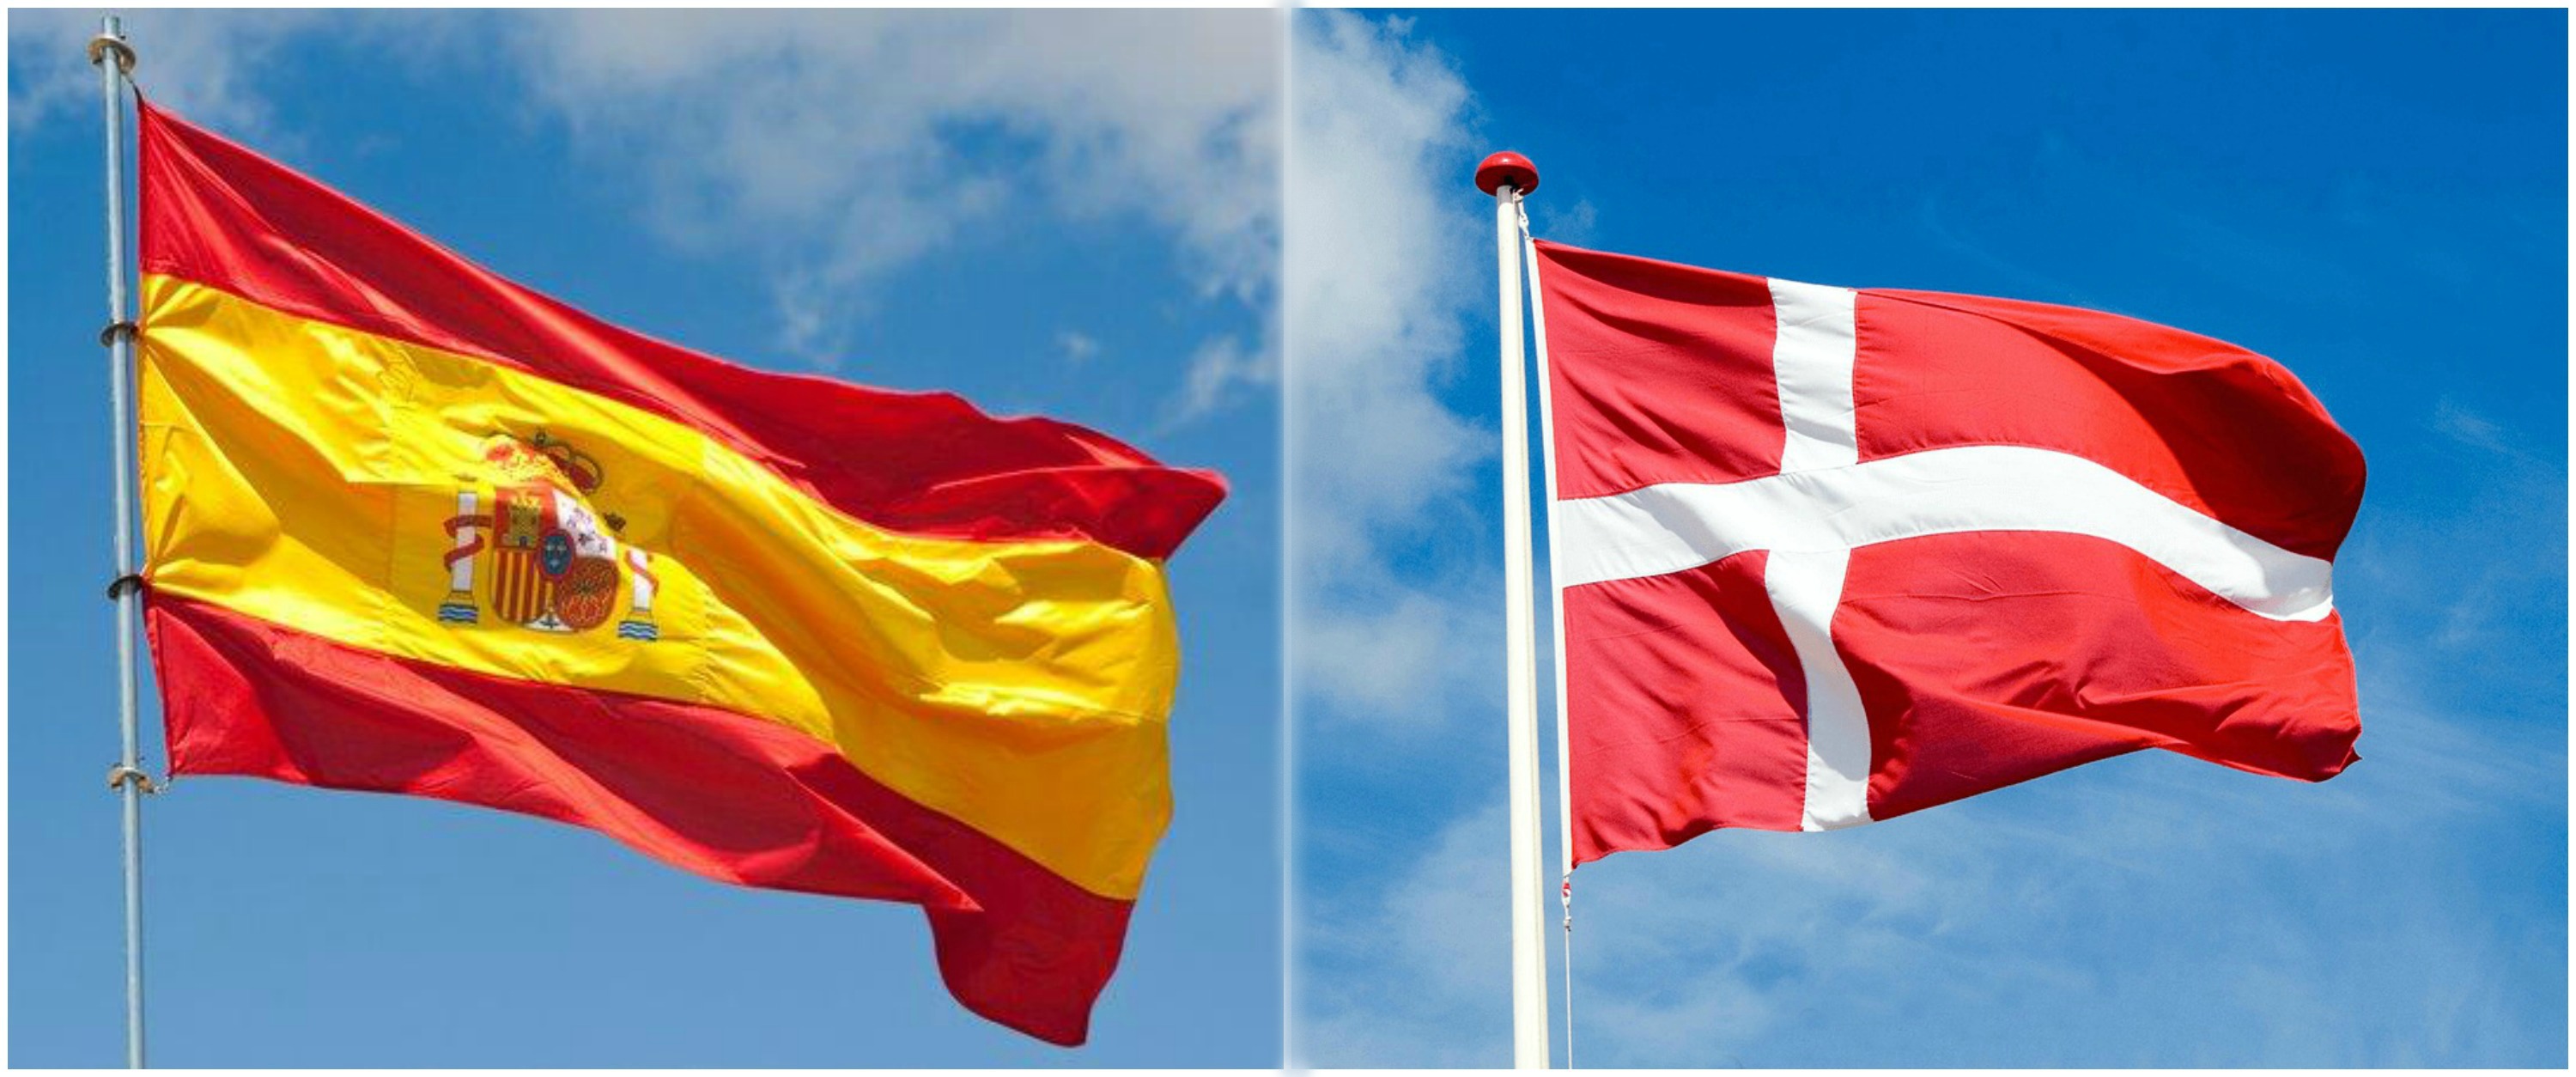 Cystic Fibrosis Around the World: Spain and Denmark